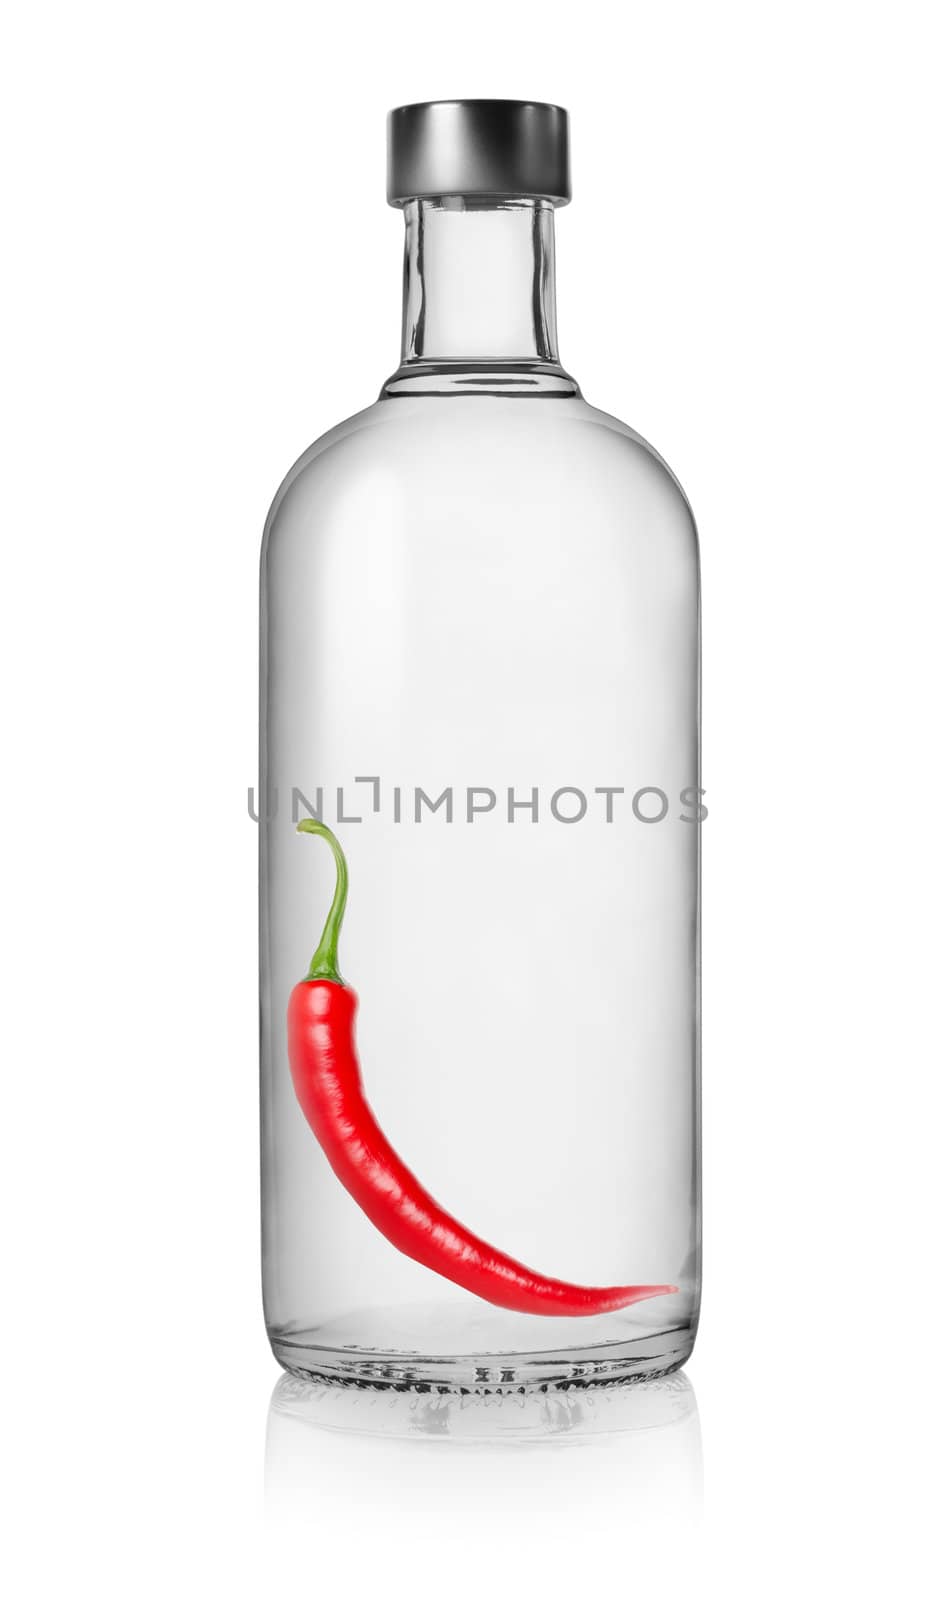 Bottle of vodka with pepper isolated on a white background. Clipping Path